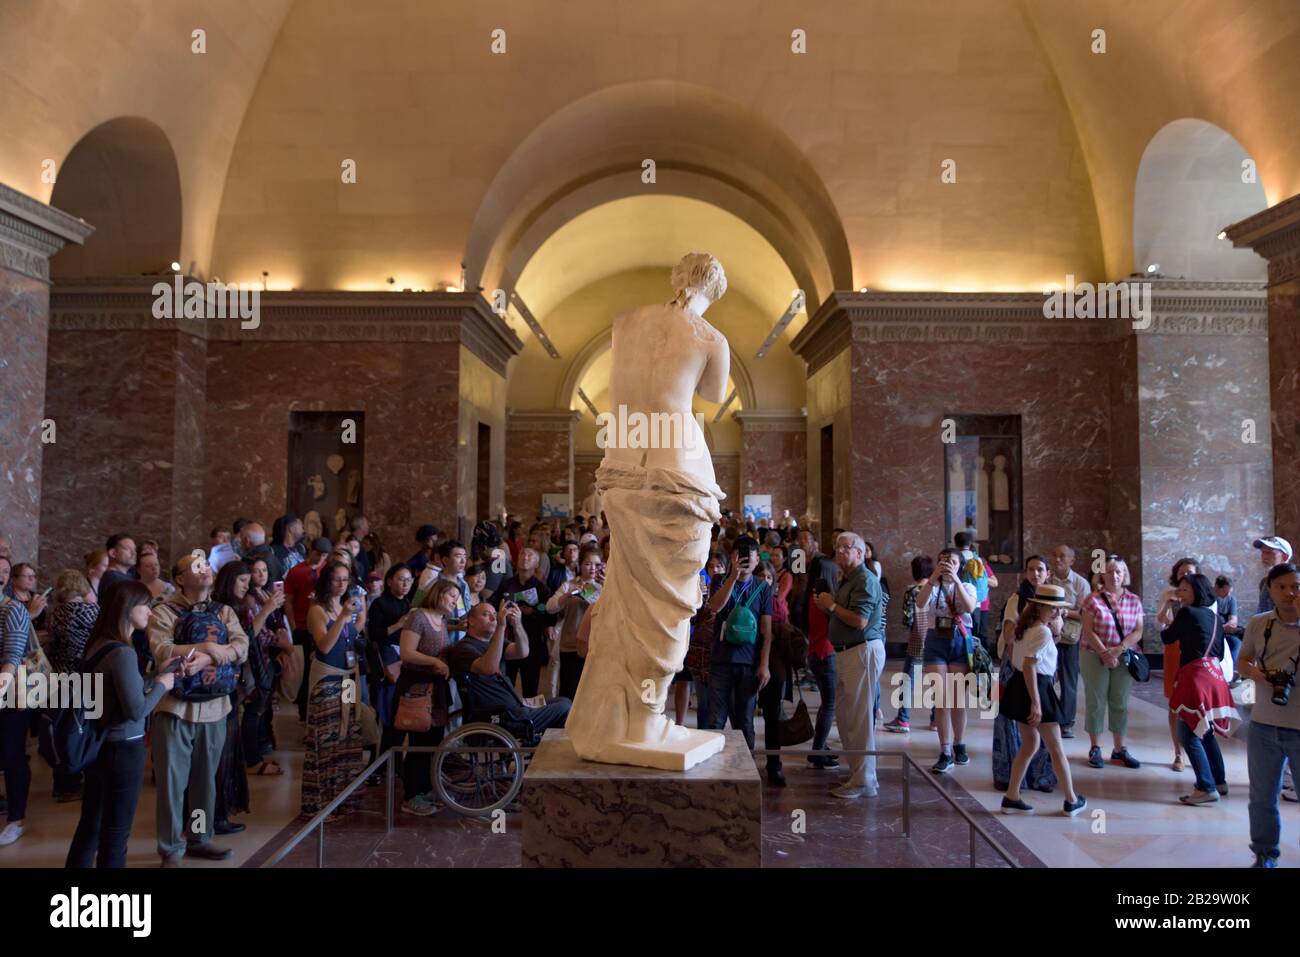 People around Venus de Milo (Aphrodite of Milos), one of the most famous ancient Greek sculpture, on display at the Louvre Museum in Paris, France Stock Photo